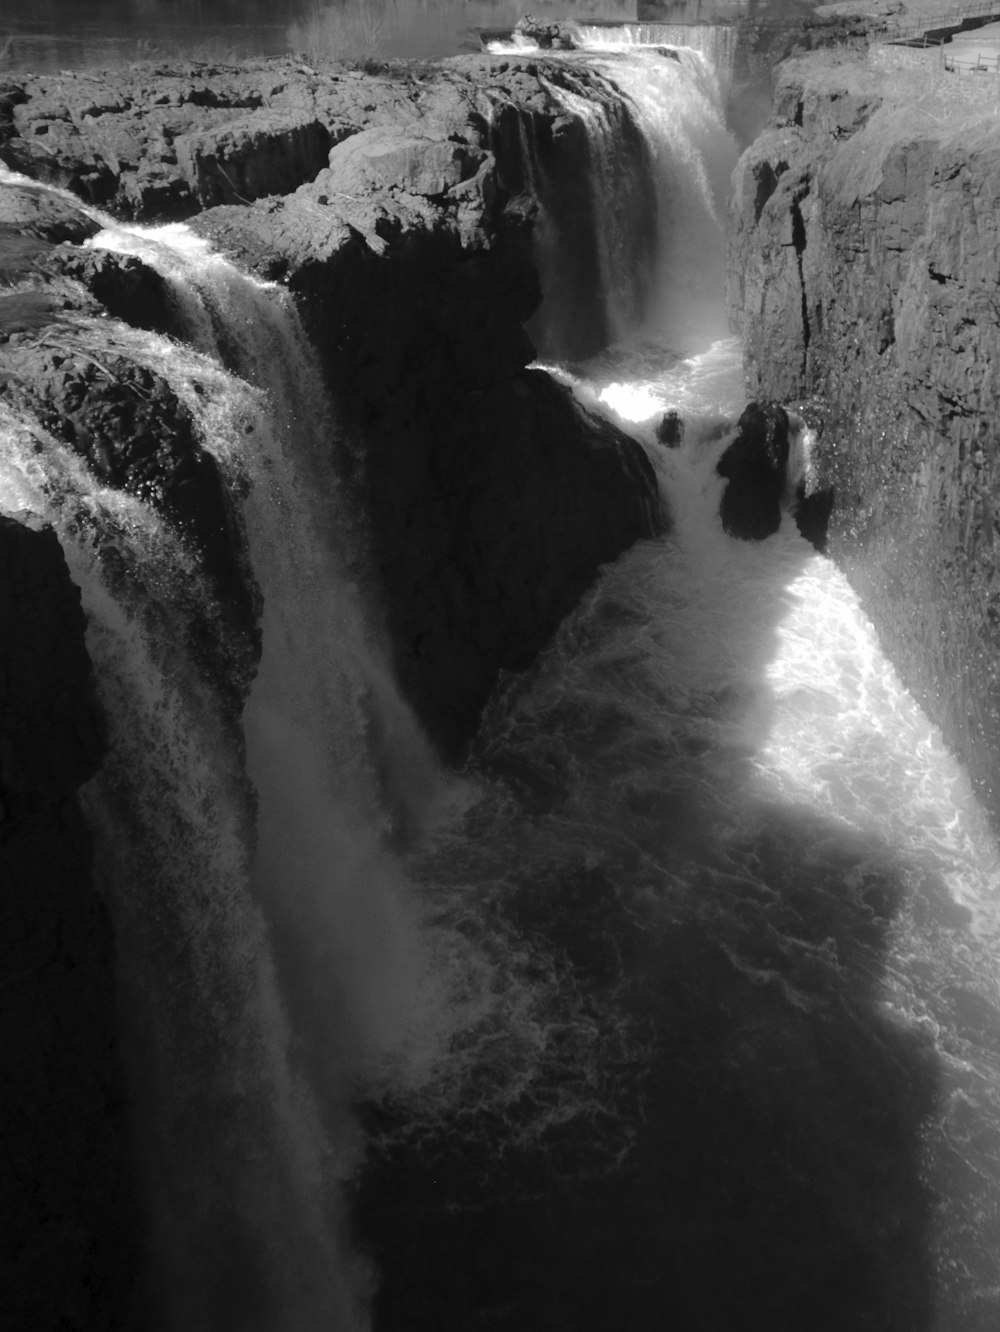 grayscale photo of man in water falls